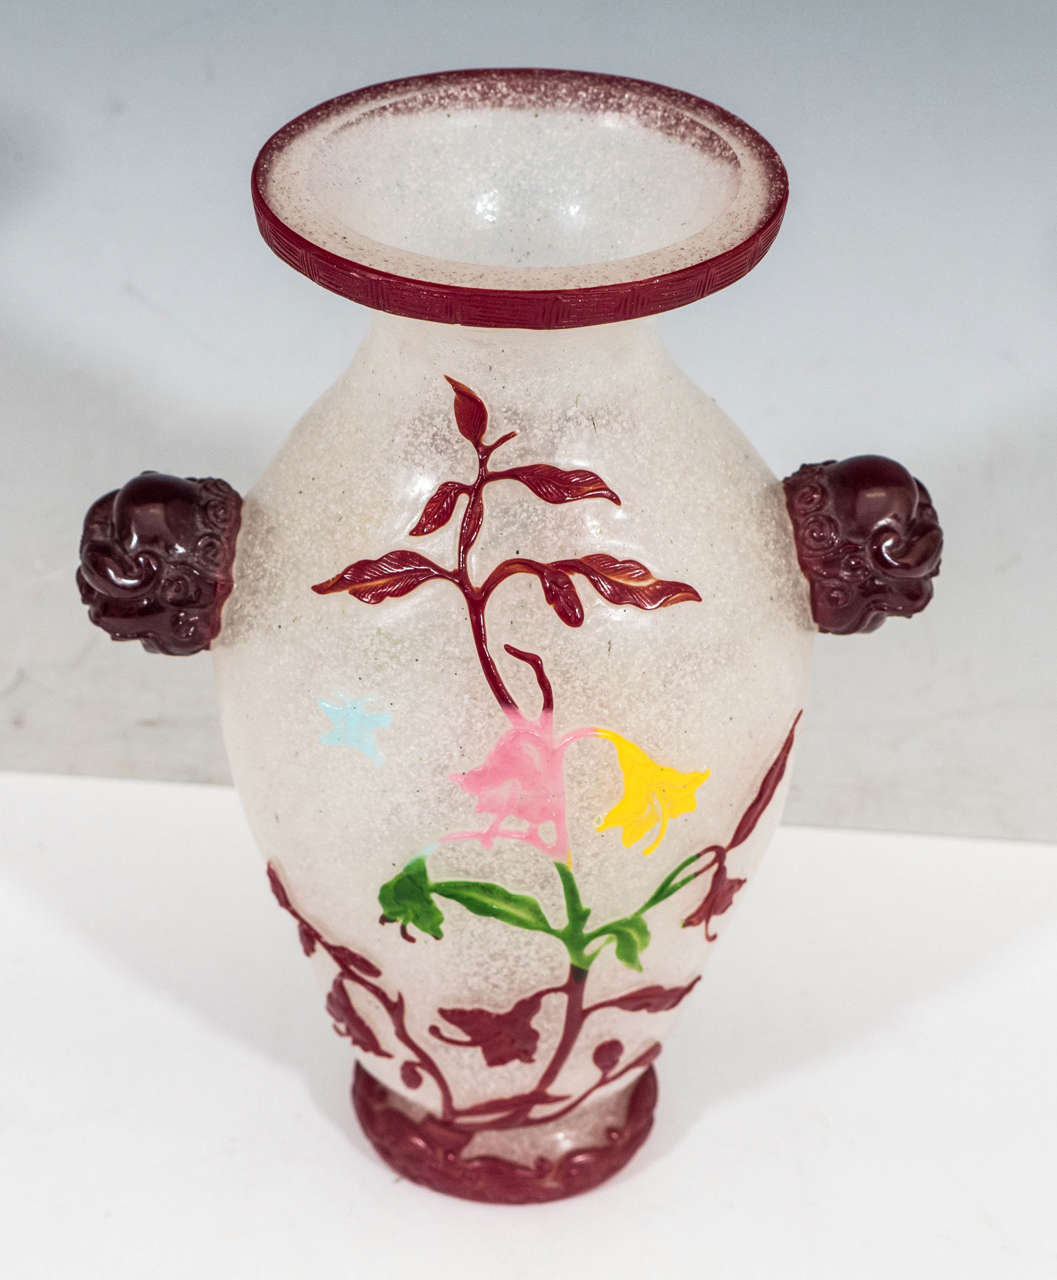 A Late 19th Century Chinese Cut-Glass Peking Vase with Decorative Floral Motif In Good Condition For Sale In New York, NY